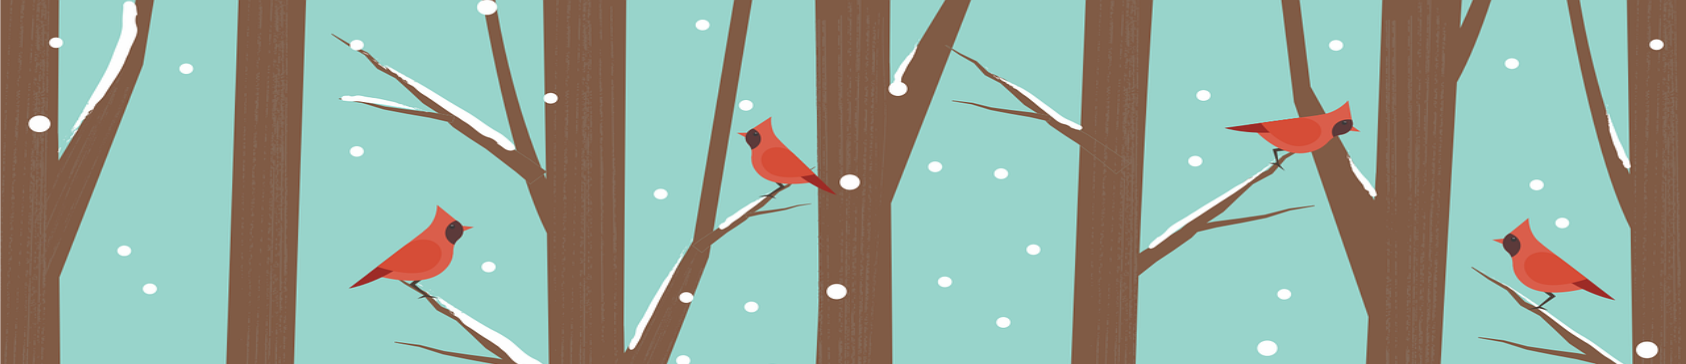 Artistic rendering of bare trees in winter, cardinals perched on four of the branches.